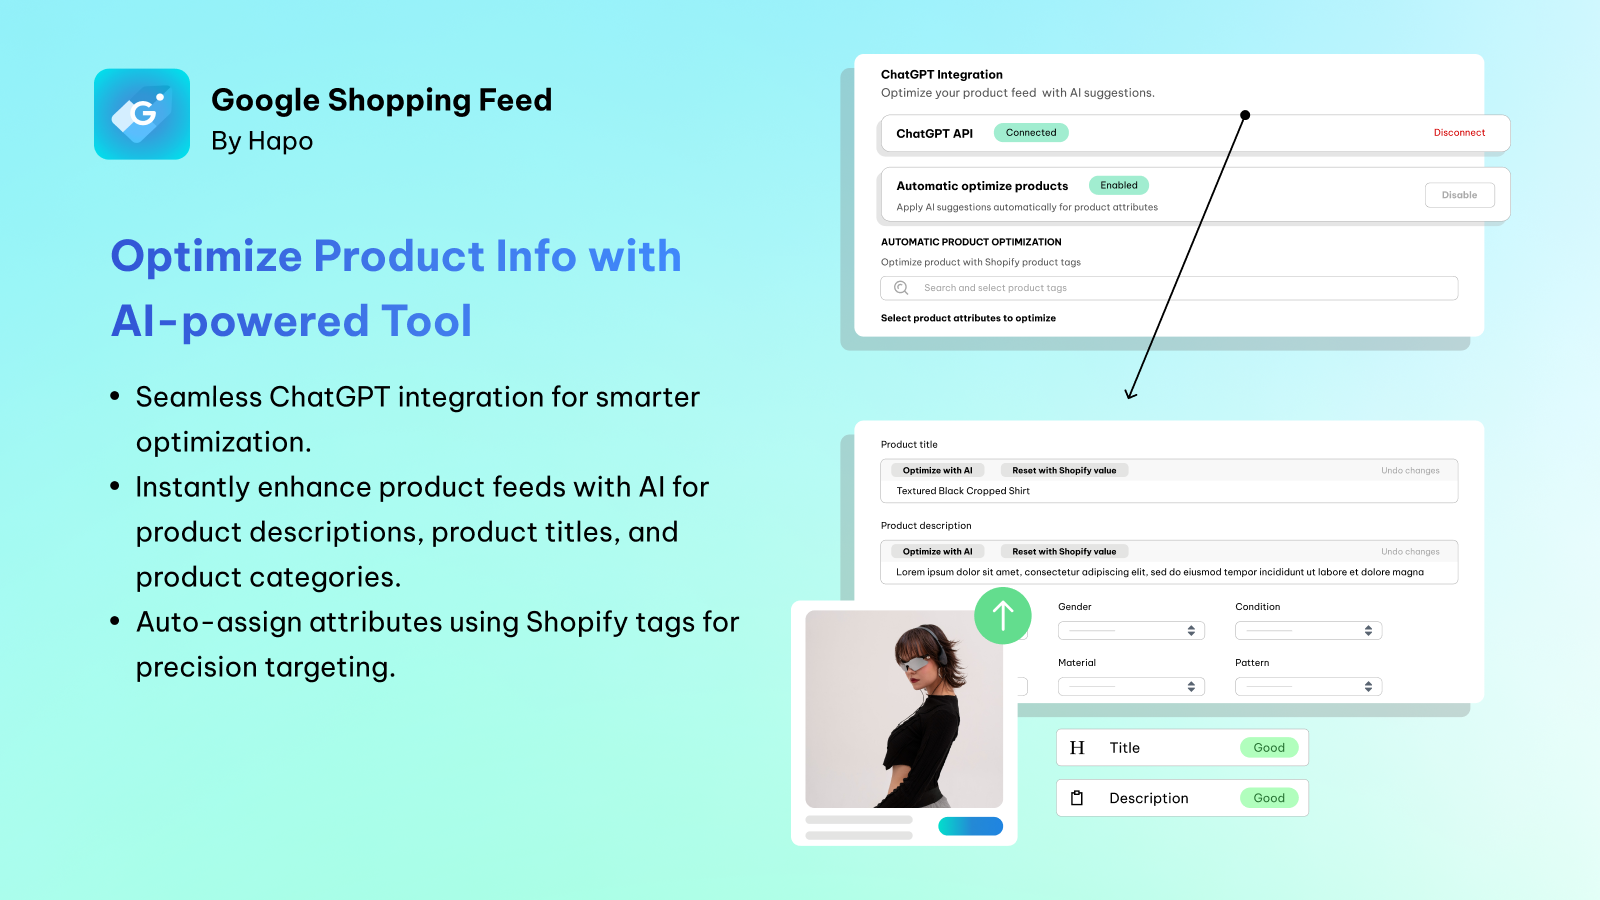 Optimize Product Info with AI-powered tool.